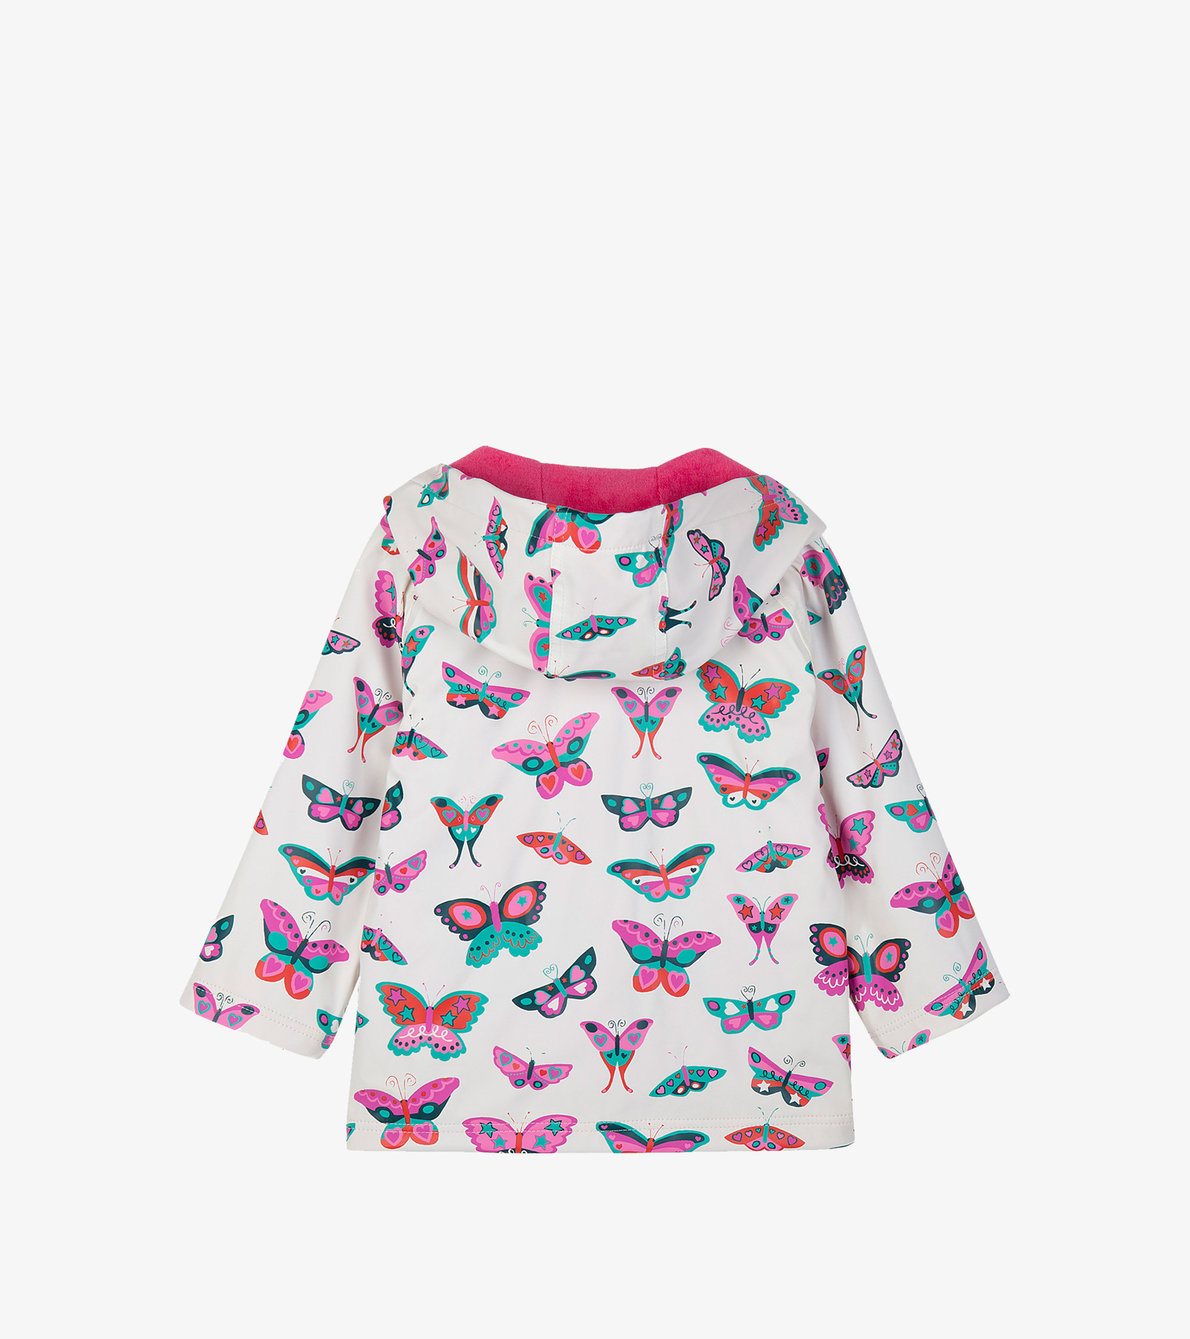 View larger image of Groovy Butterflies Raincoat